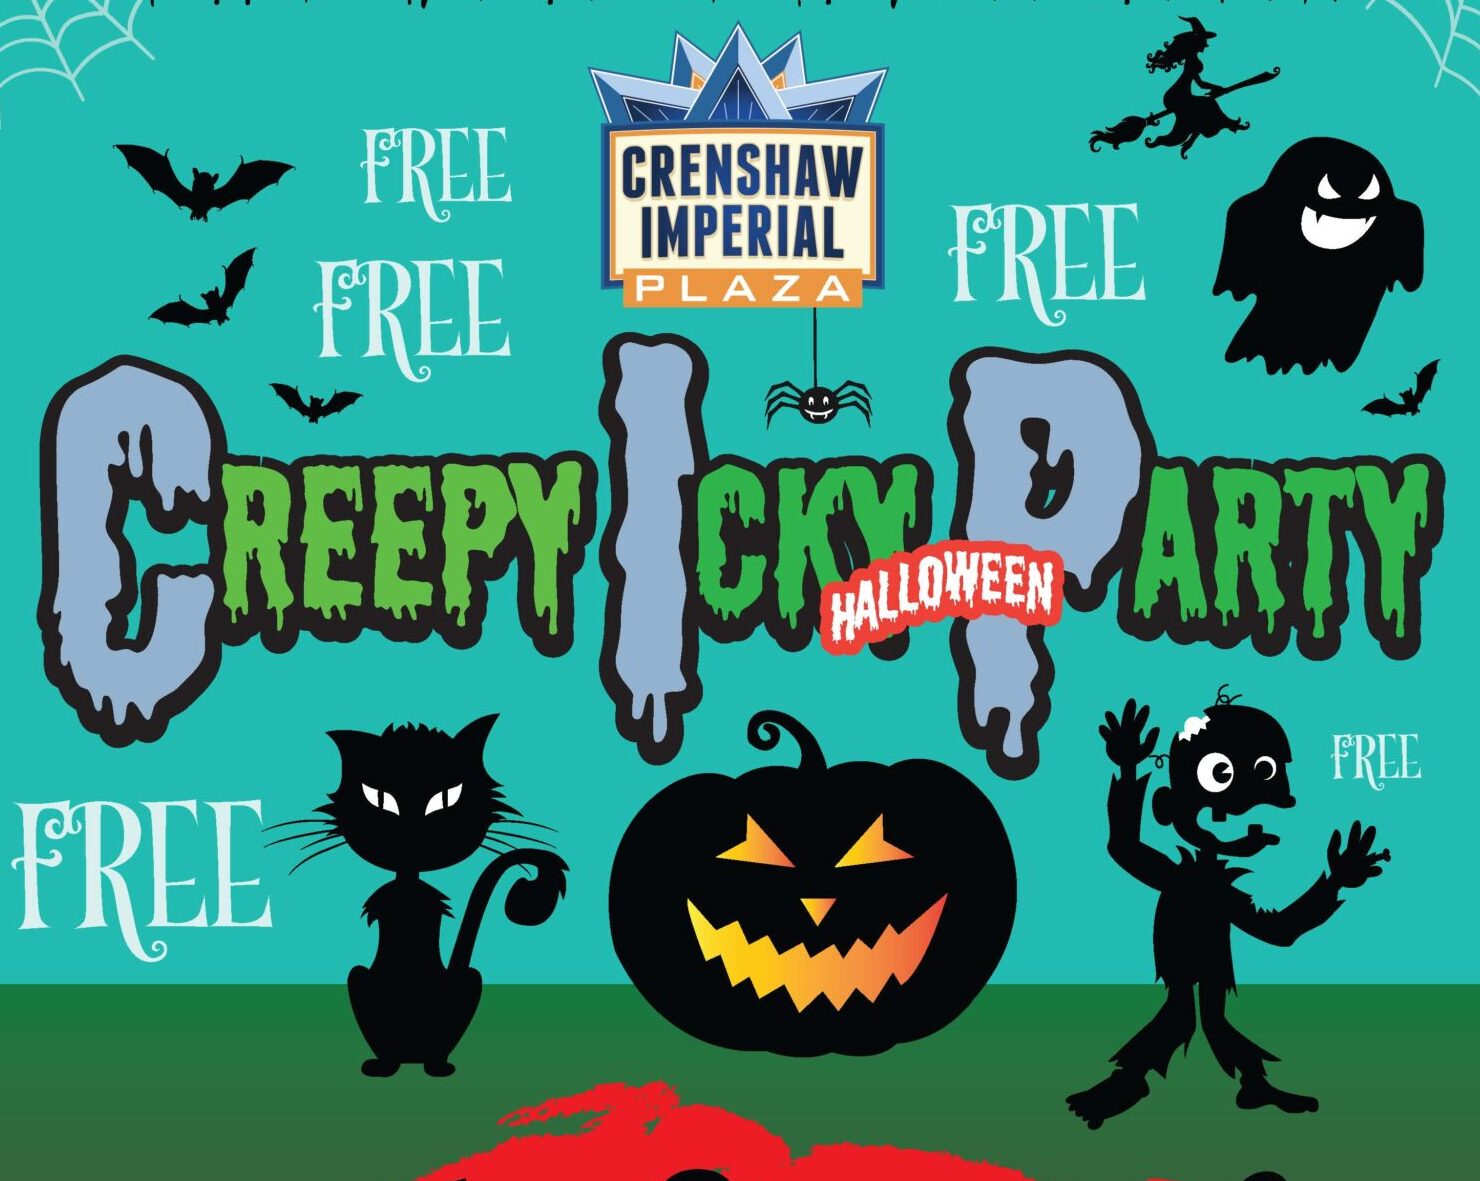 Creepy Icky (Halloween) Party | Crenshaw Imperial Plaza